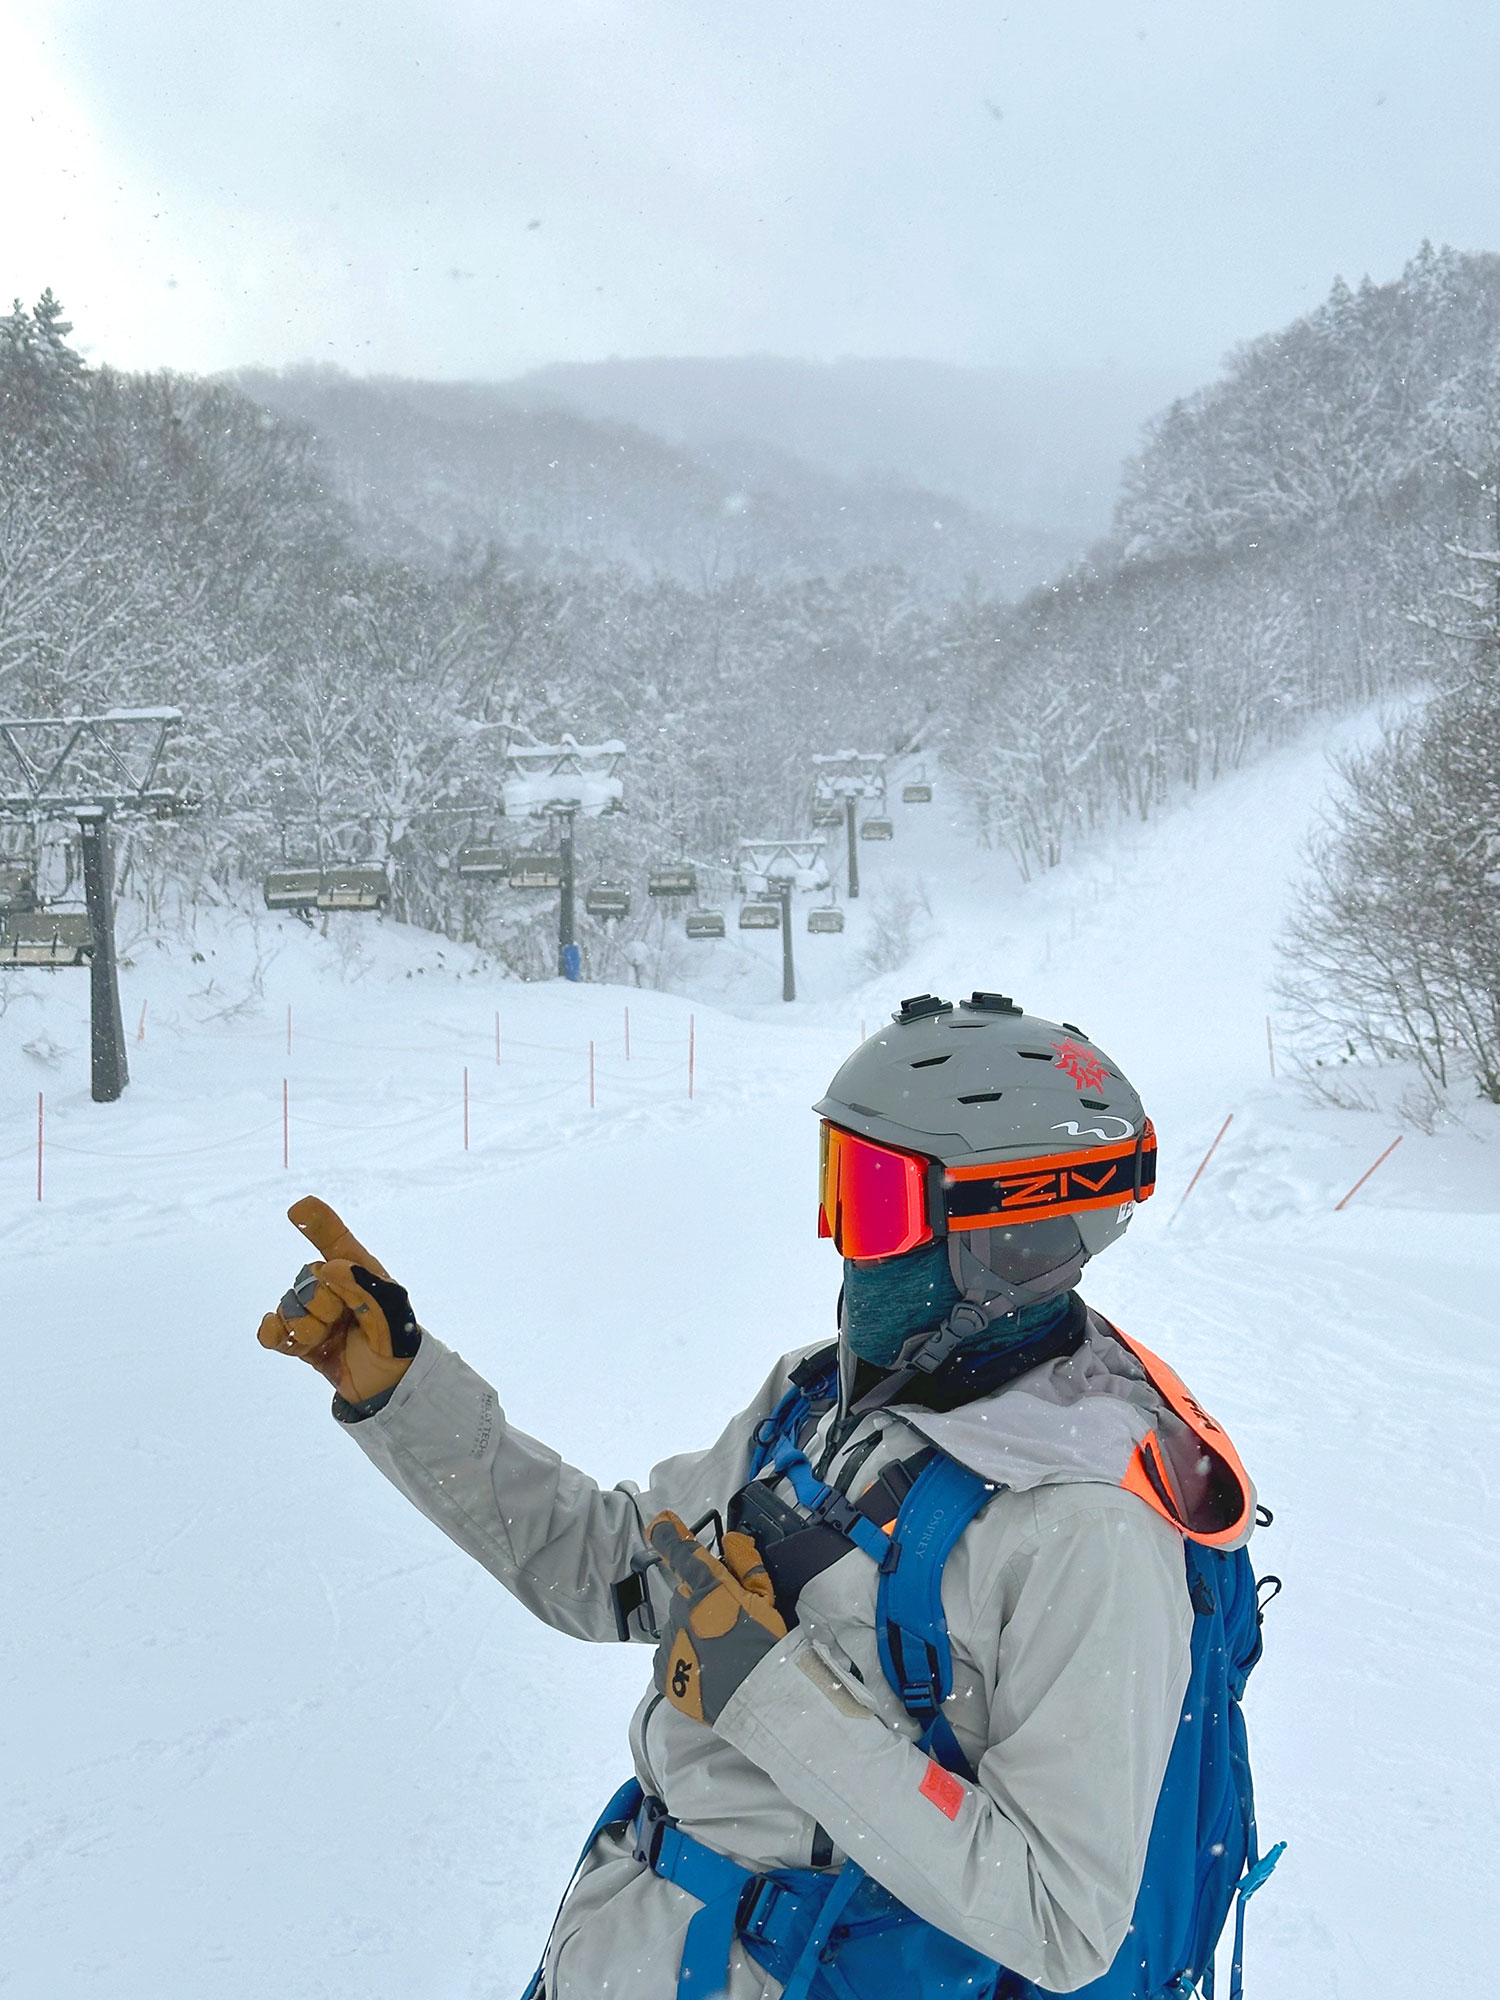 A skier wearing orange ZIV snow goggles, dressed in light gray cold-resistant clothing, carrying a blue backpack, and wearing mustard-yellow cold-resistant gloves.